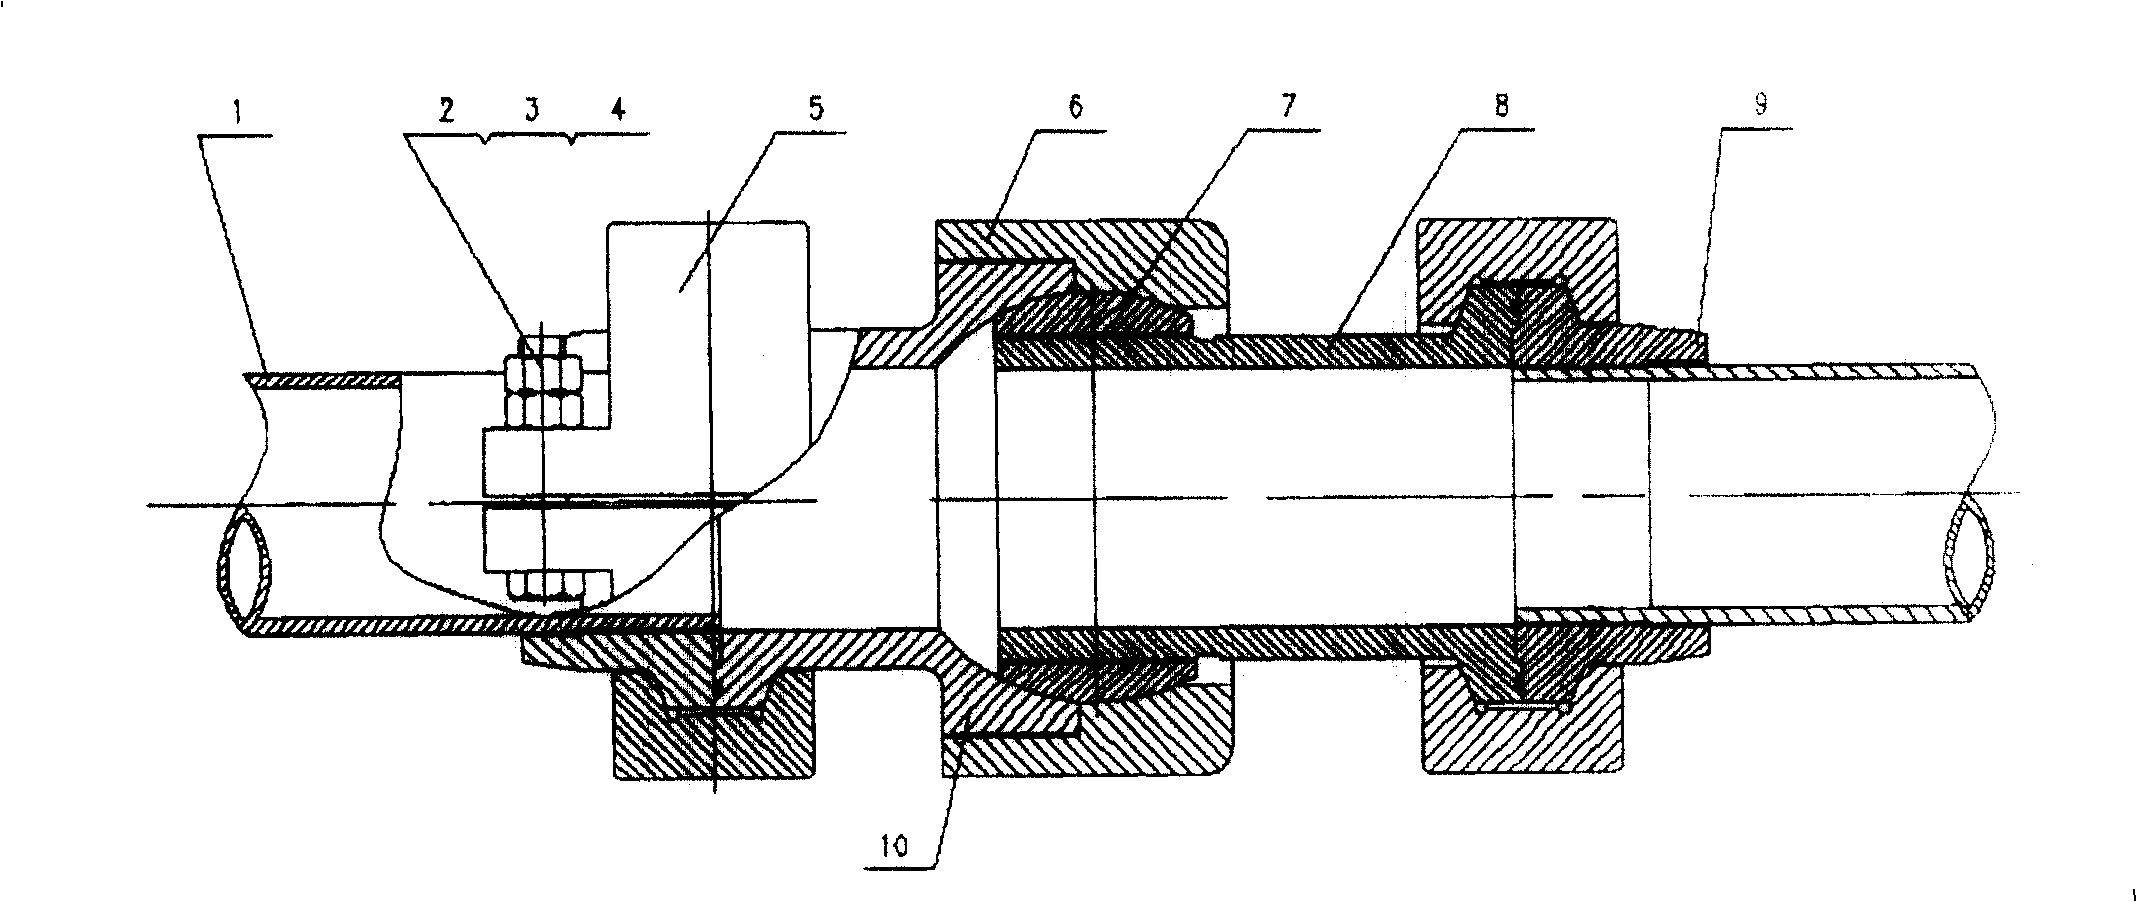 Ball socket joint used in deep sea resource exploiting system mine throwing subsystem